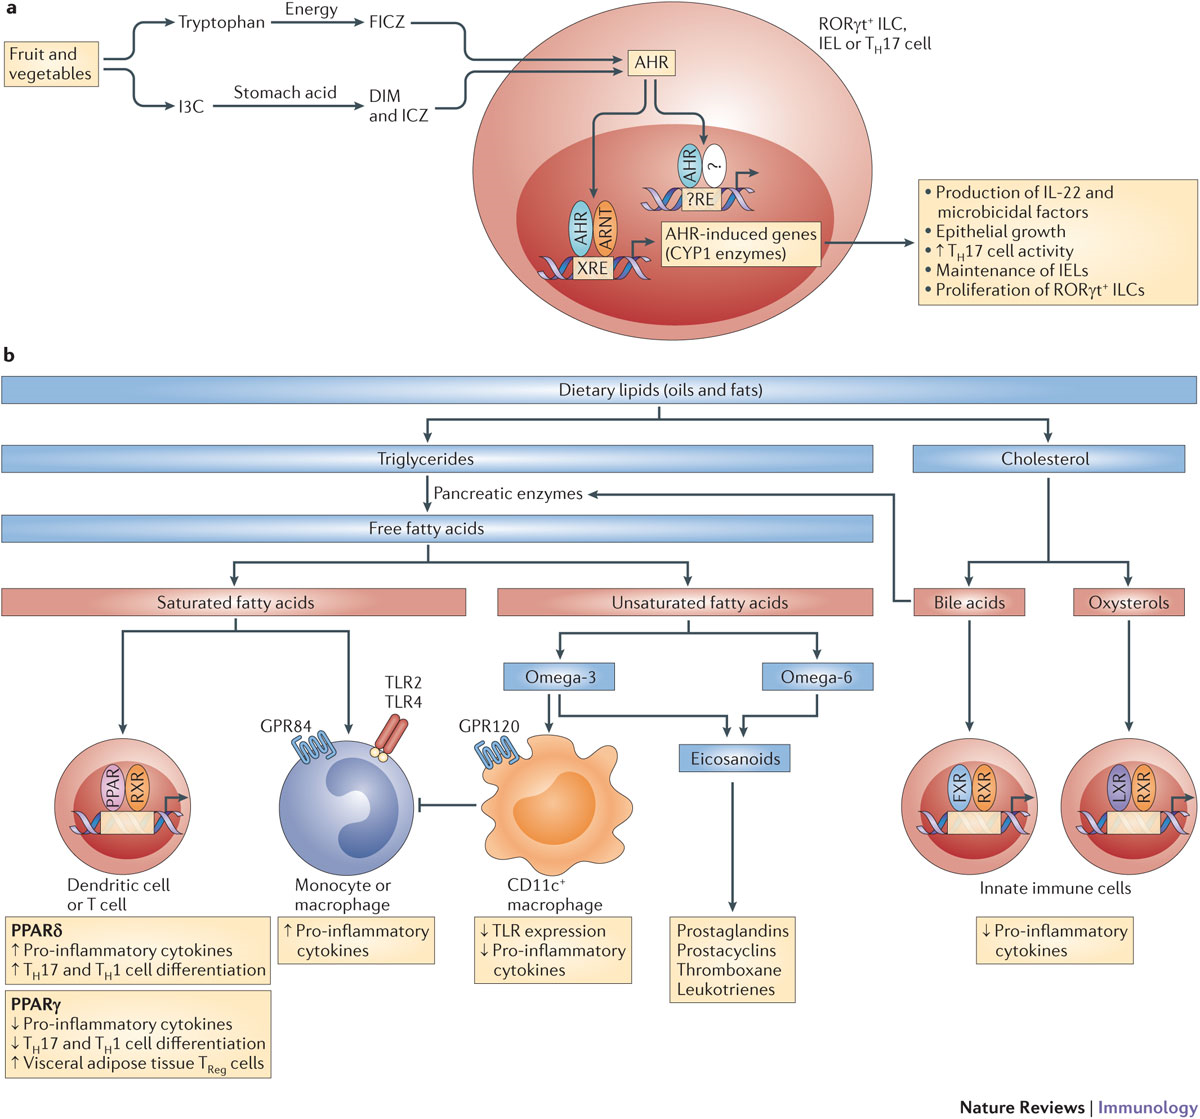 Image from Veldhoen, Nature Reviews Immunology, 2012